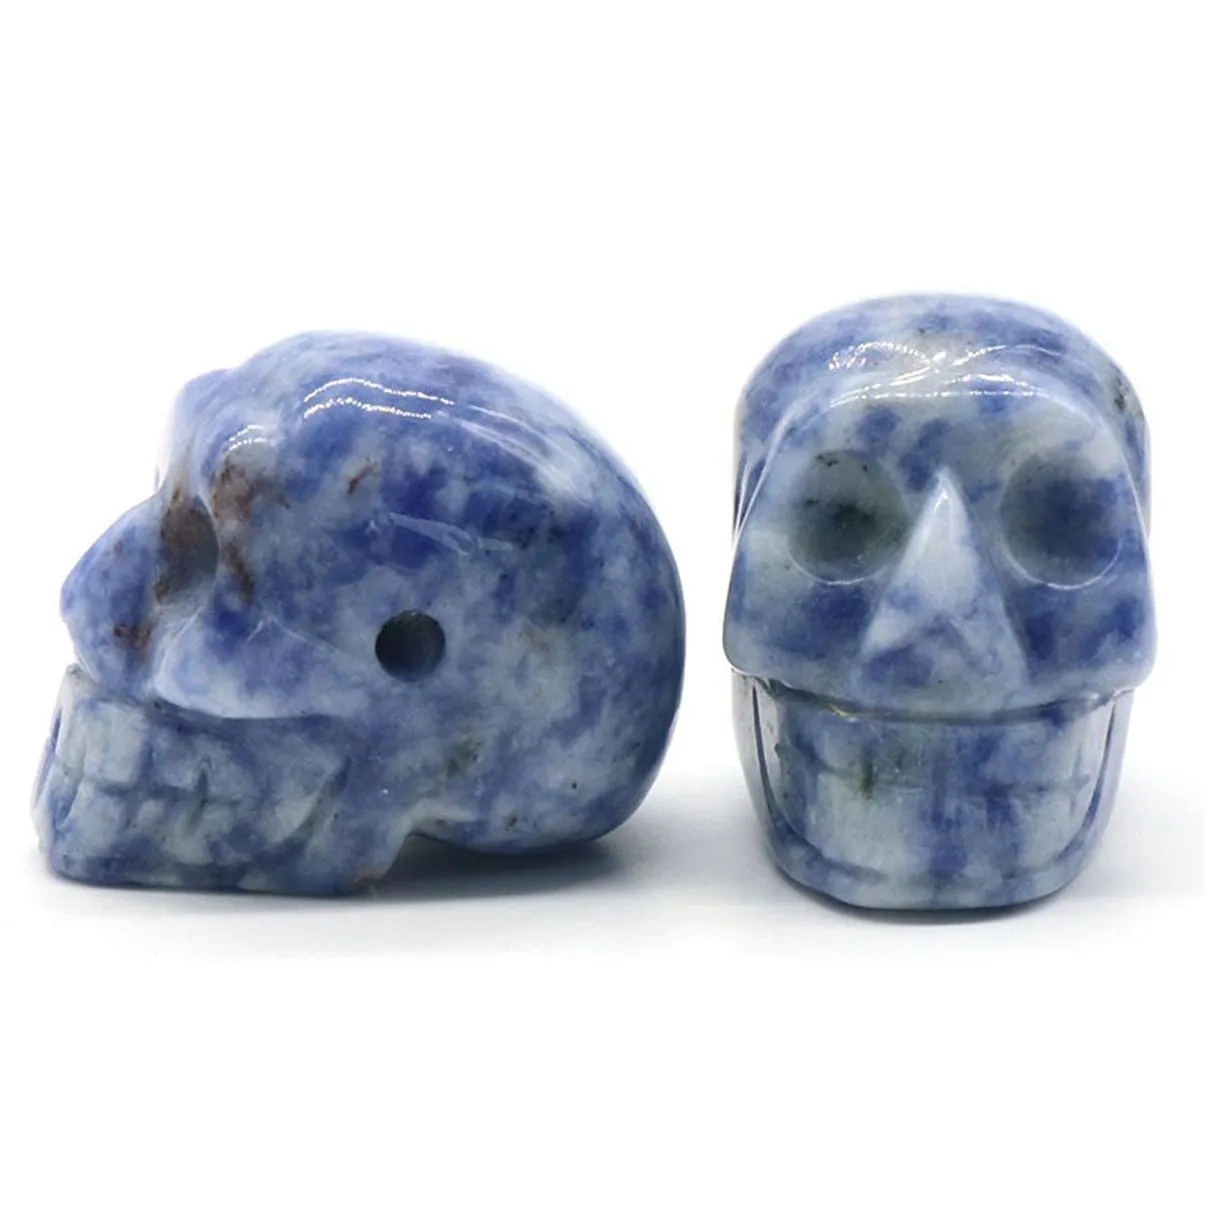 23mm Natural White Agate Skull Head Statue Hand Carved Gemstone Human Skeleton Head Figurines Reiki Healing Stone for Home Office